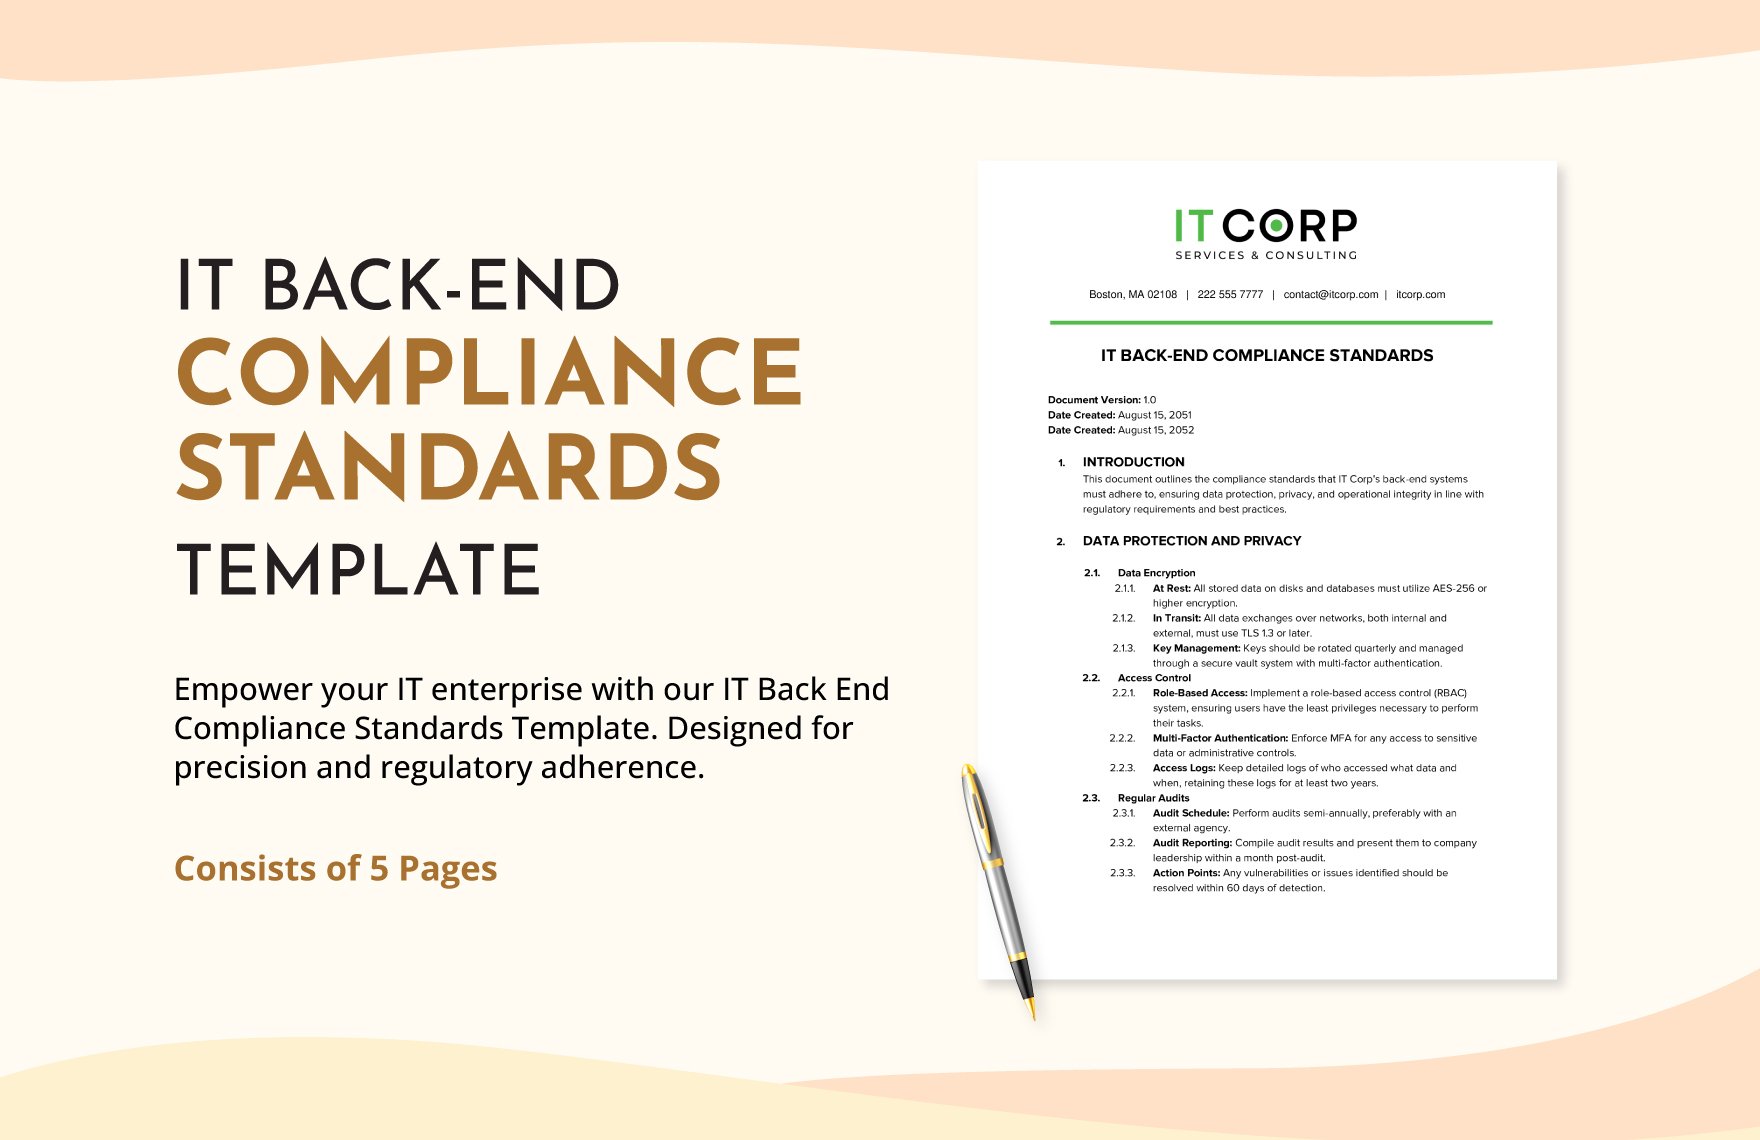 IT Back-End Compliance Standards Template